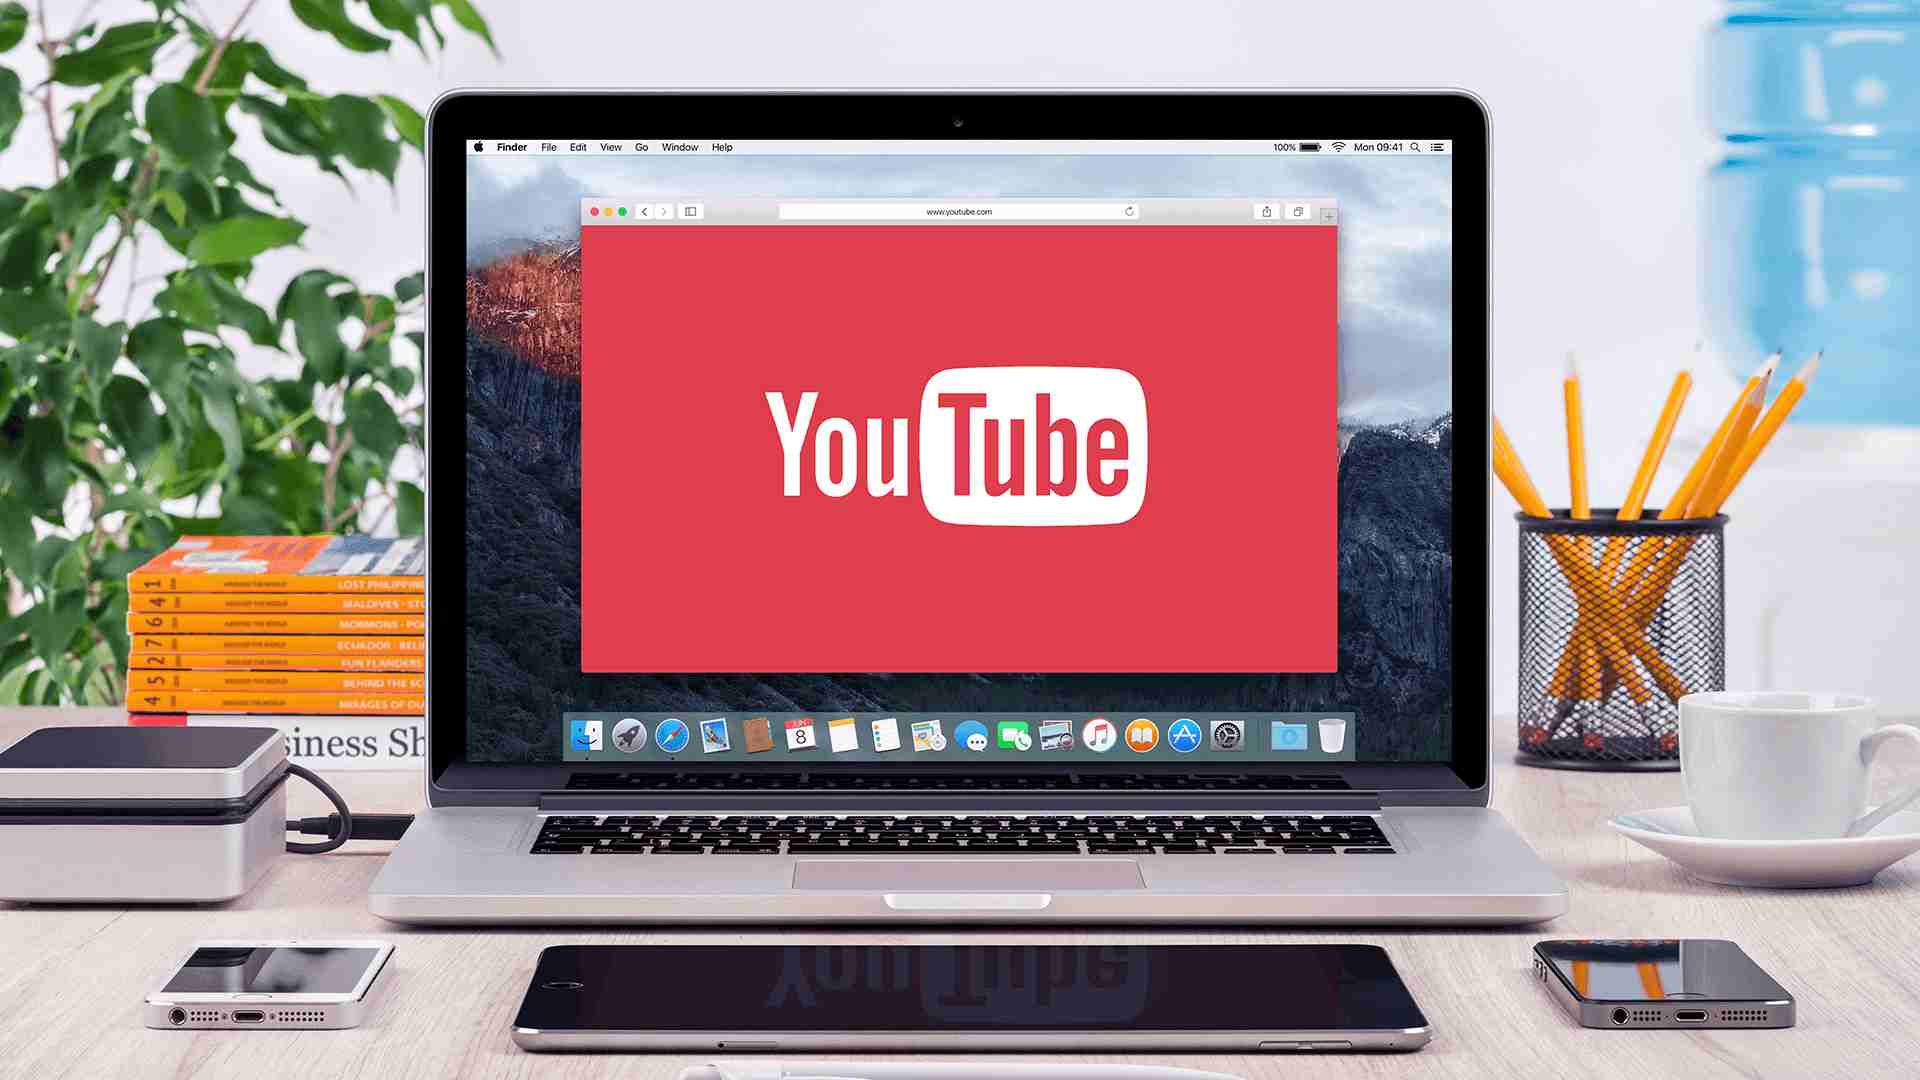 25 ways to promote the YouTube channel